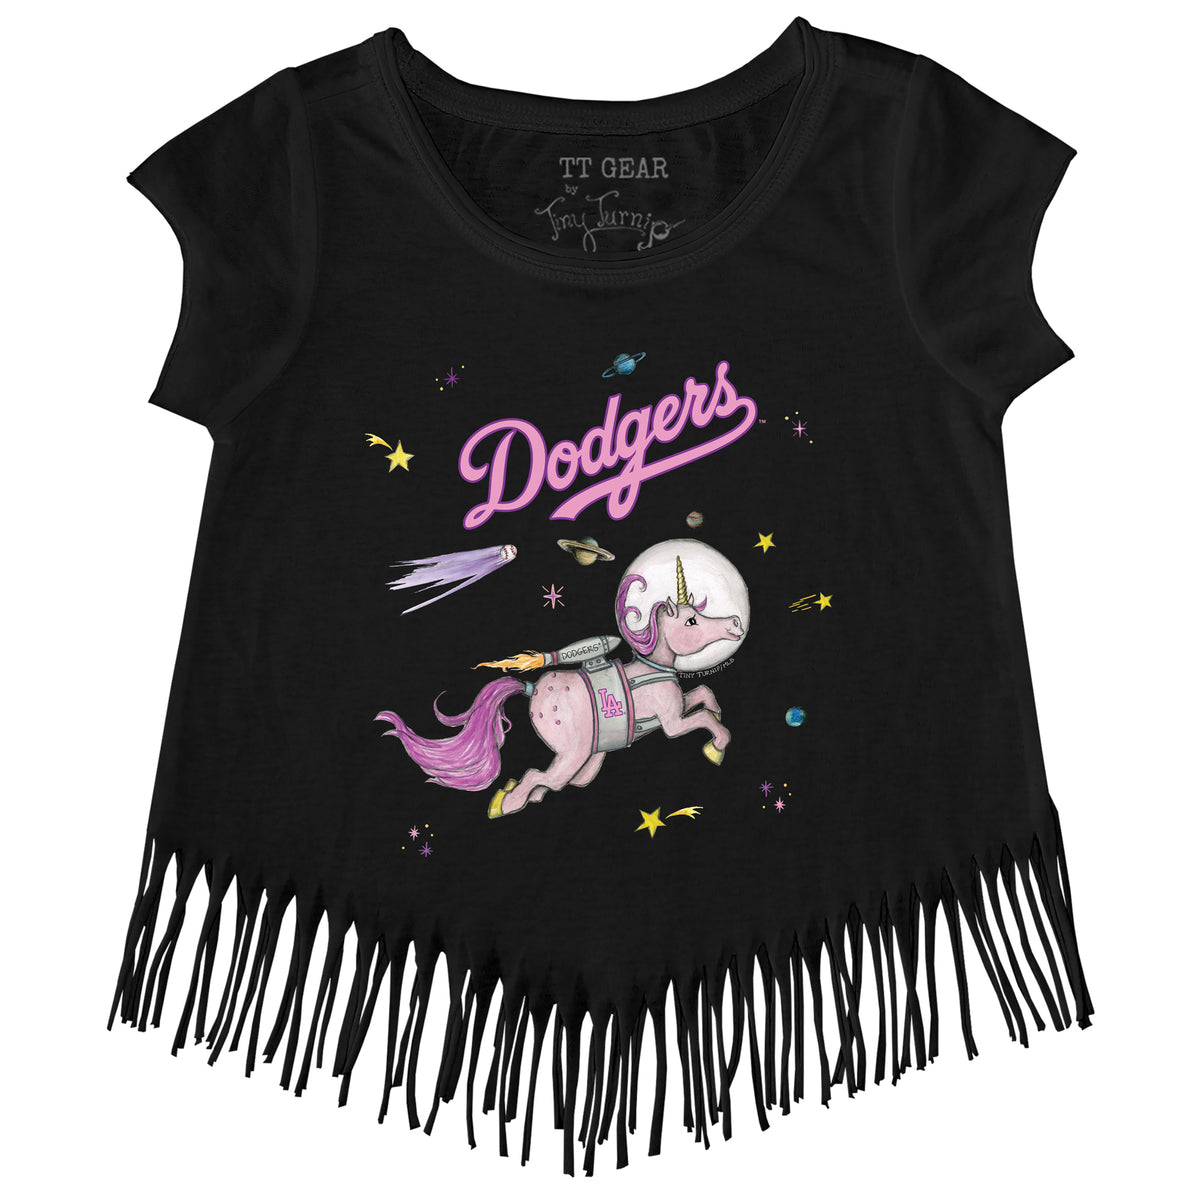 Youth Los Angeles Dodgers Tiny Turnip White Kate the Catcher T